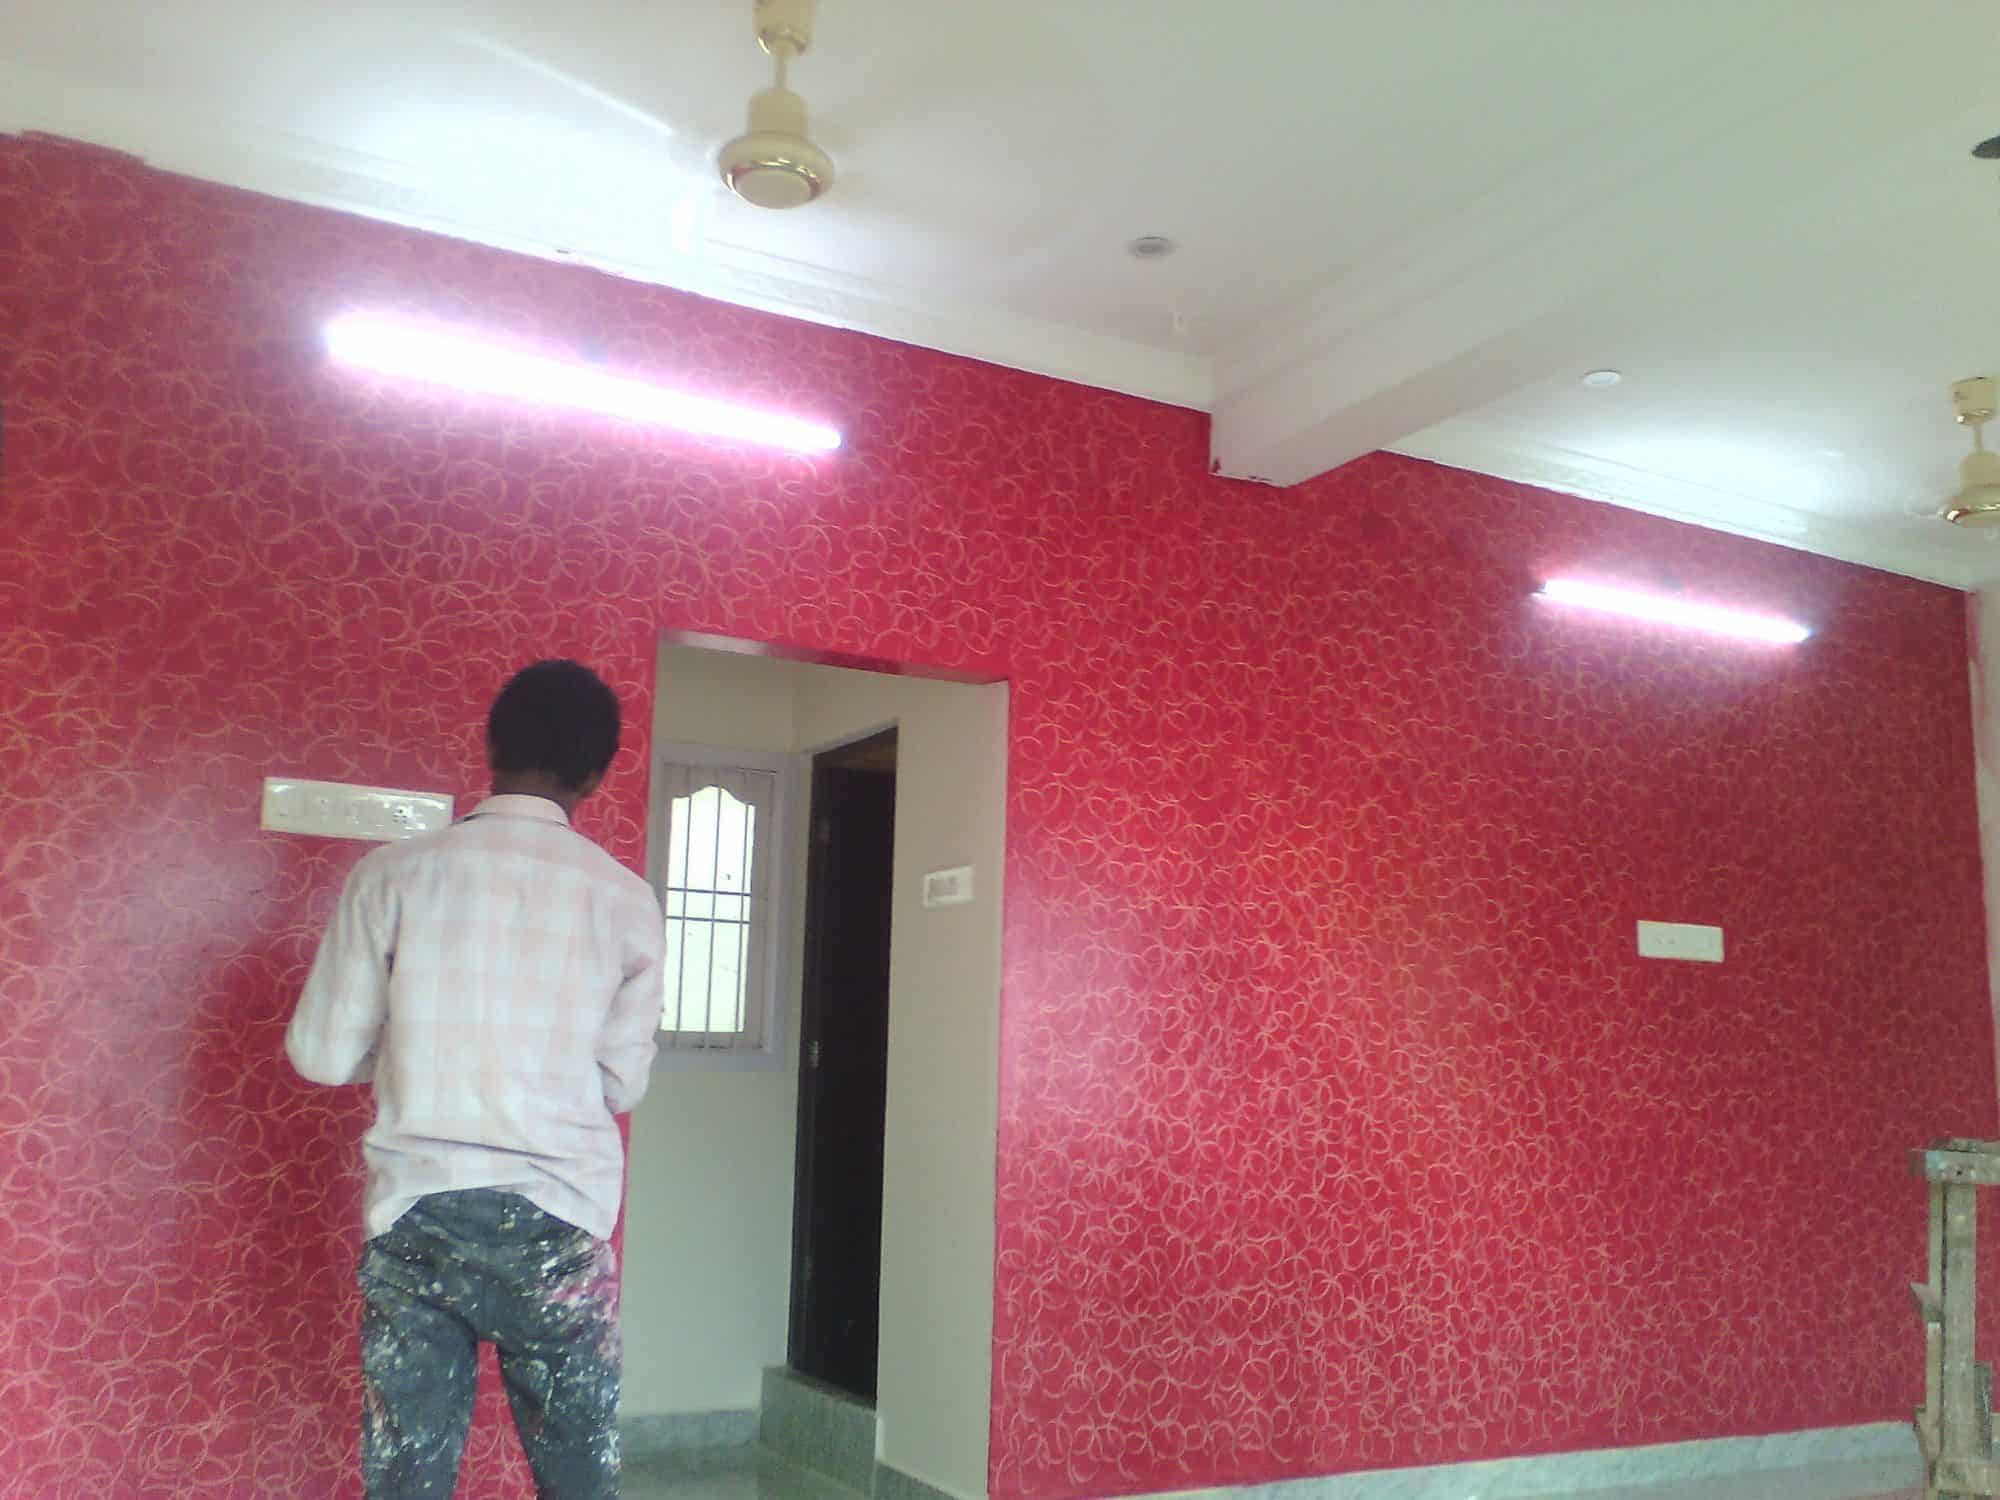 Room Wall Texture Design - Cochin Painters